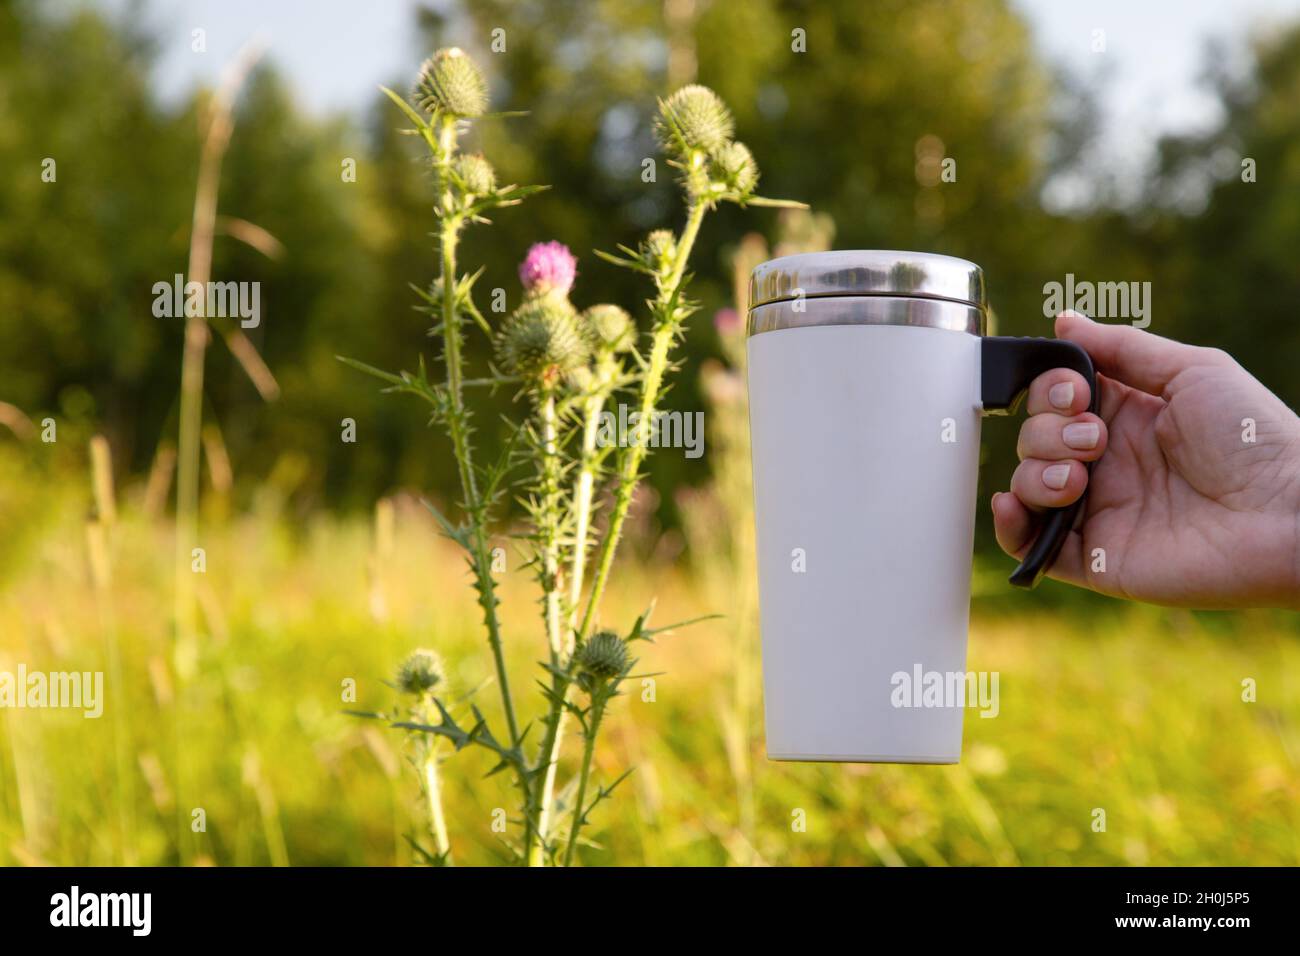 Mockup of a woman holding a white travel mug by a burdock flower. Empty mug mock up for design promotion. Stock Photo